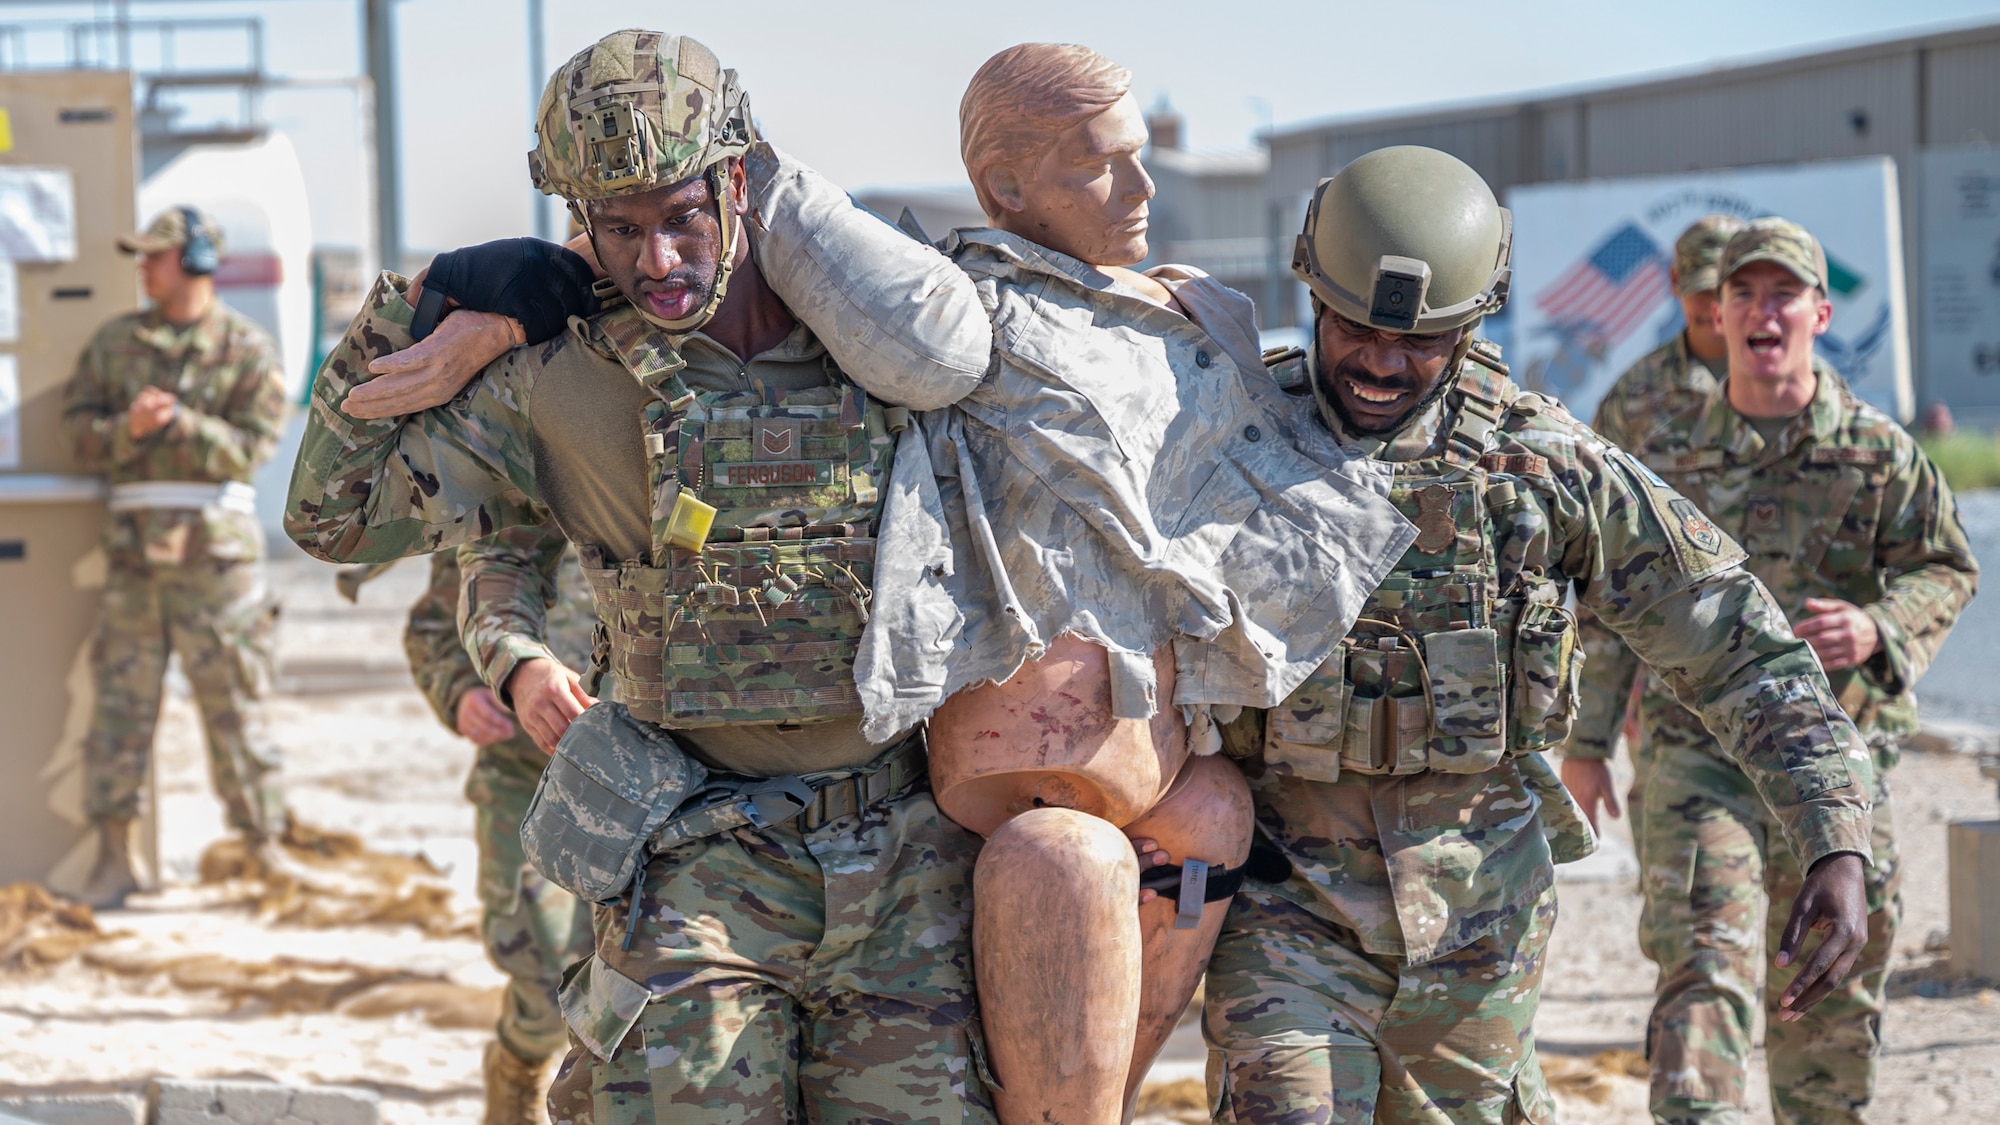 Tech. Sgts. Omari Ferguson and Brandon Kelly, both assigned to the 386th Expeditionary Security Forces Squadron, carry a training dummy during Tactical Combat Casualty Care training at Al Jaber Air Base, Kuwait, Nov. 5, 2021.